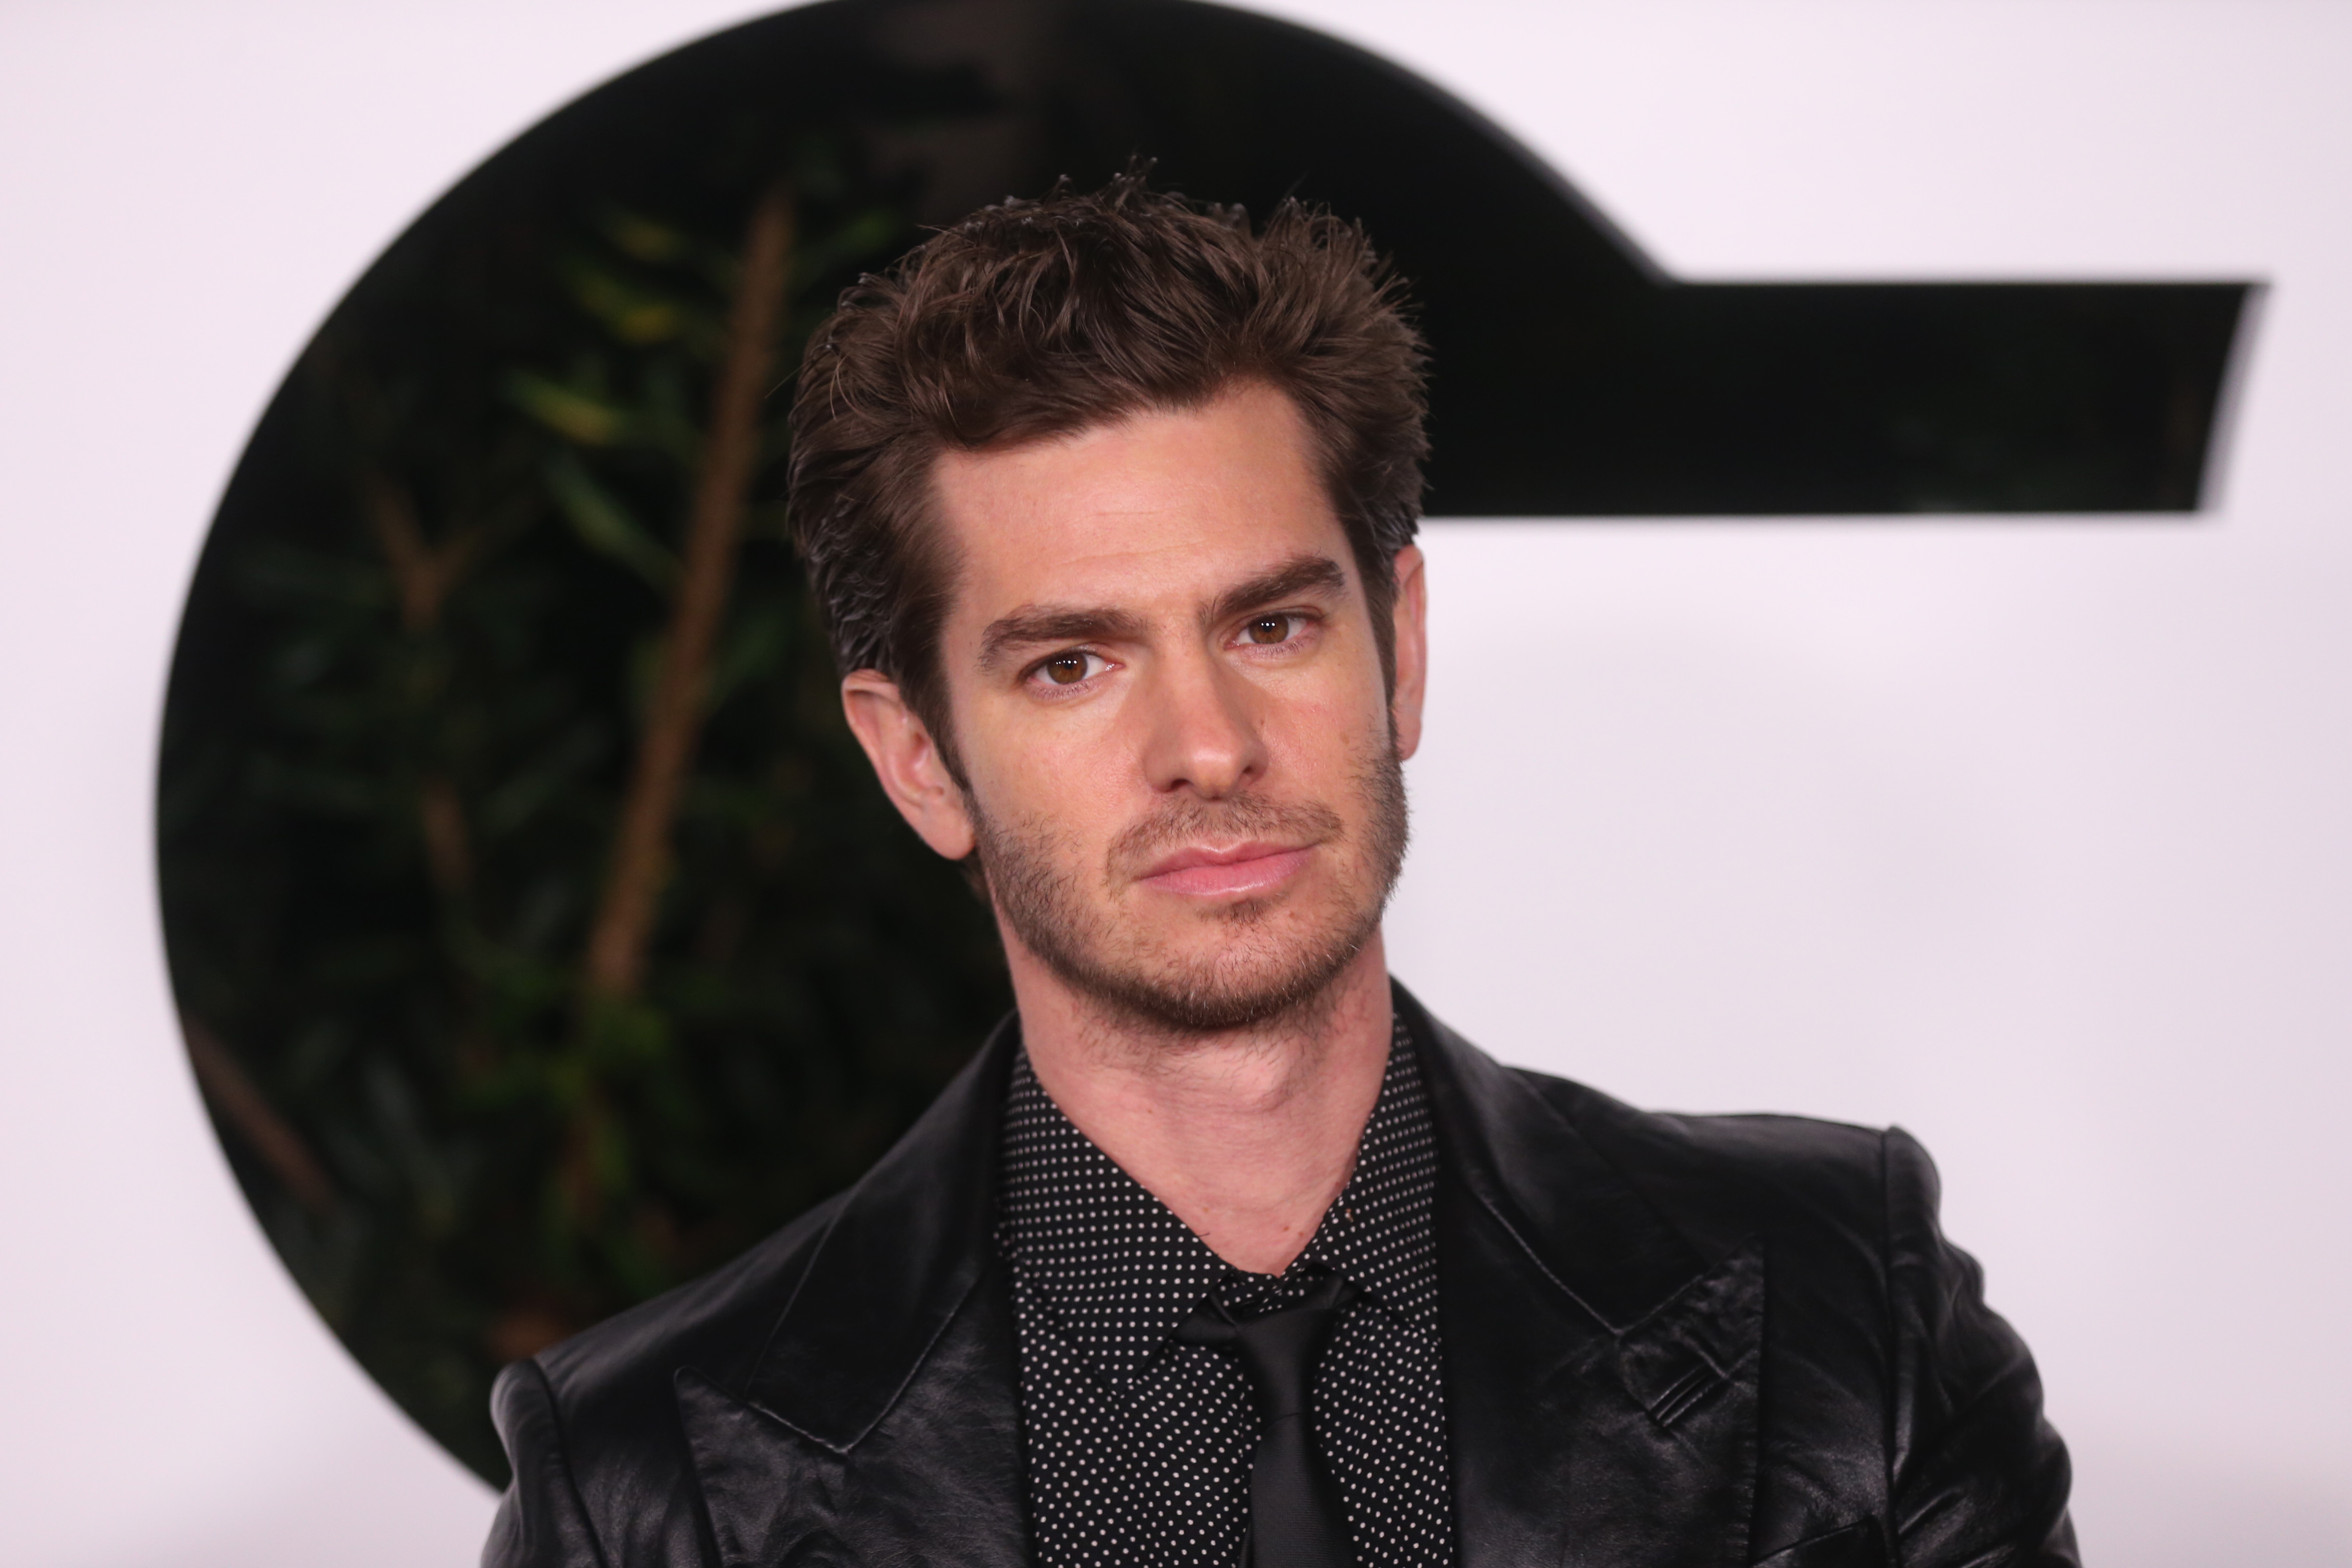 Amazing Spider-Man 3 Trending As Fans Call For Andrew Garfield To